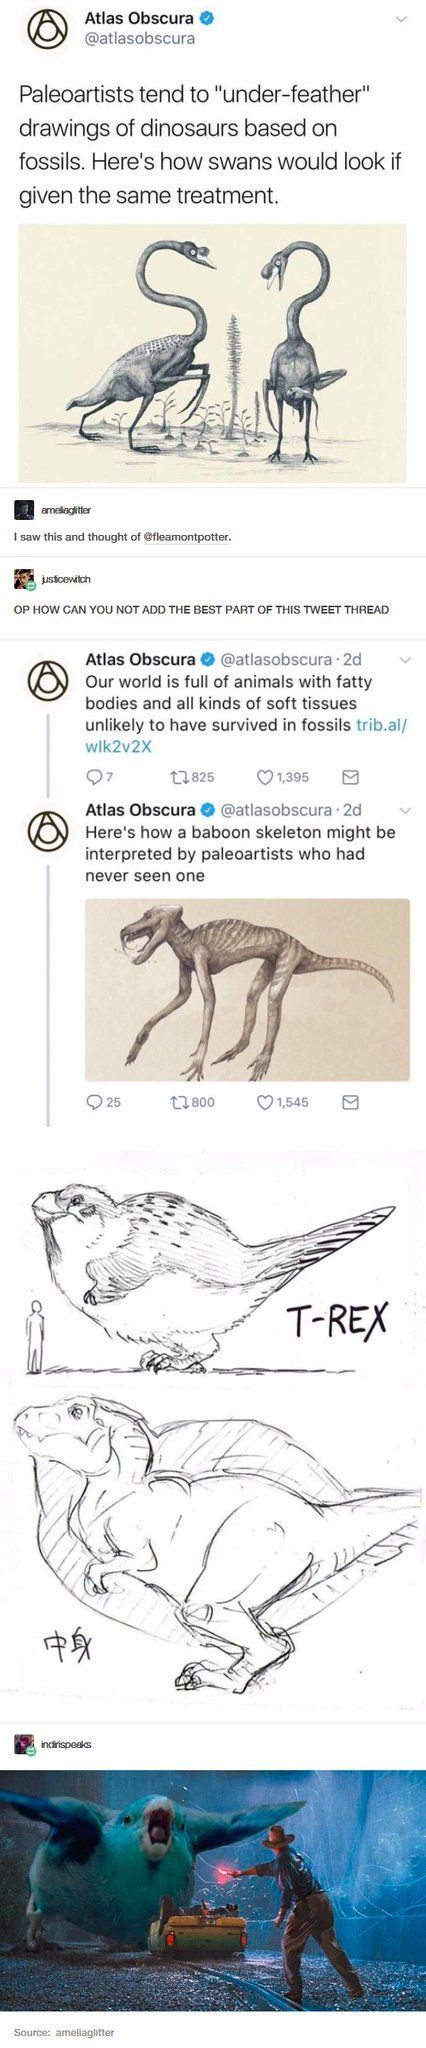 Feathered Dinosaurs ?